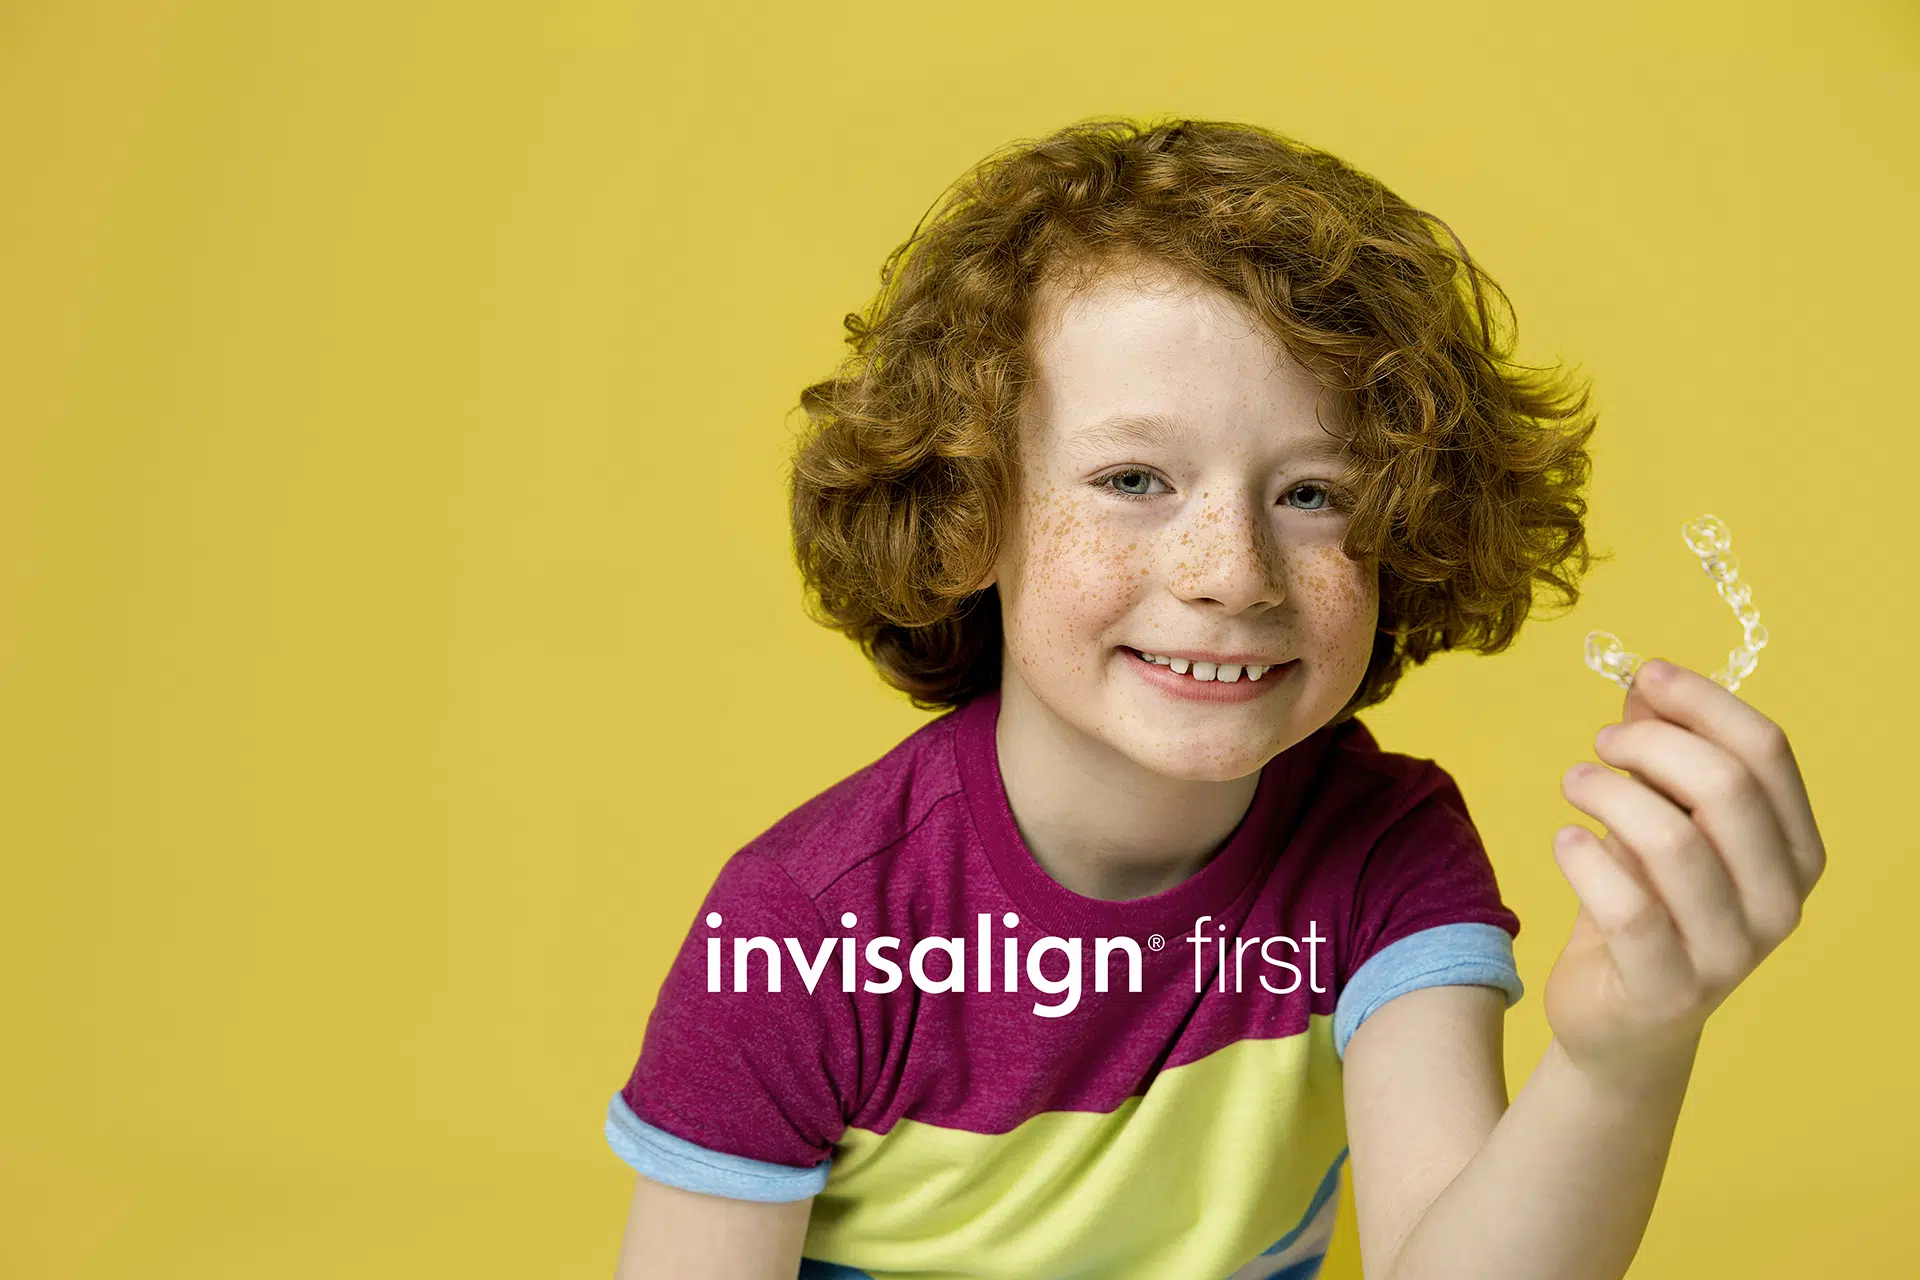 Can Kids Get Invisalign Too?